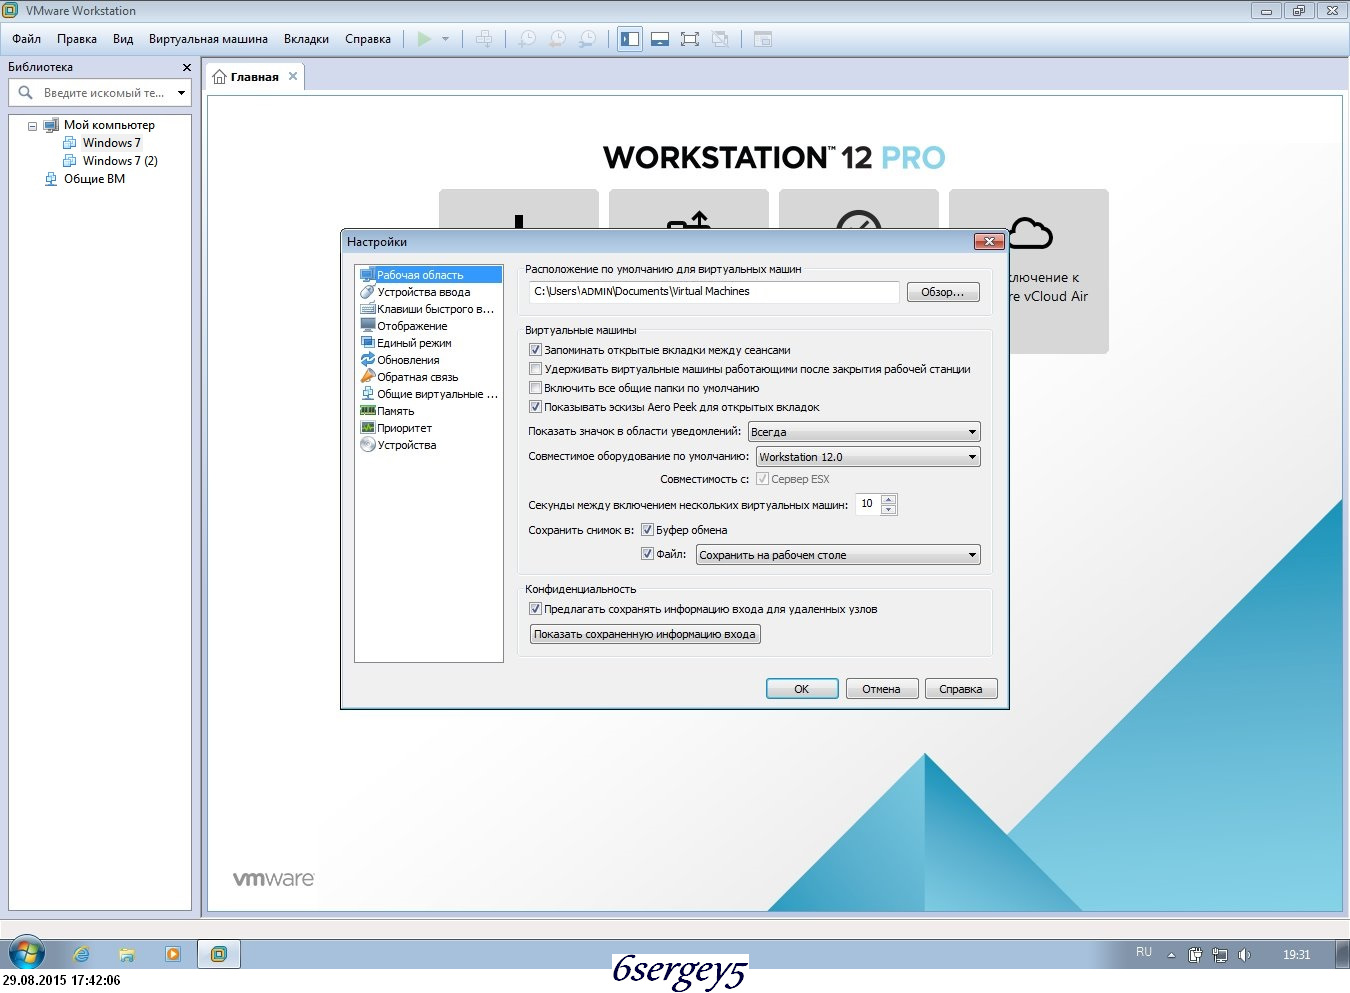 mac os for vmware workstation 12 player